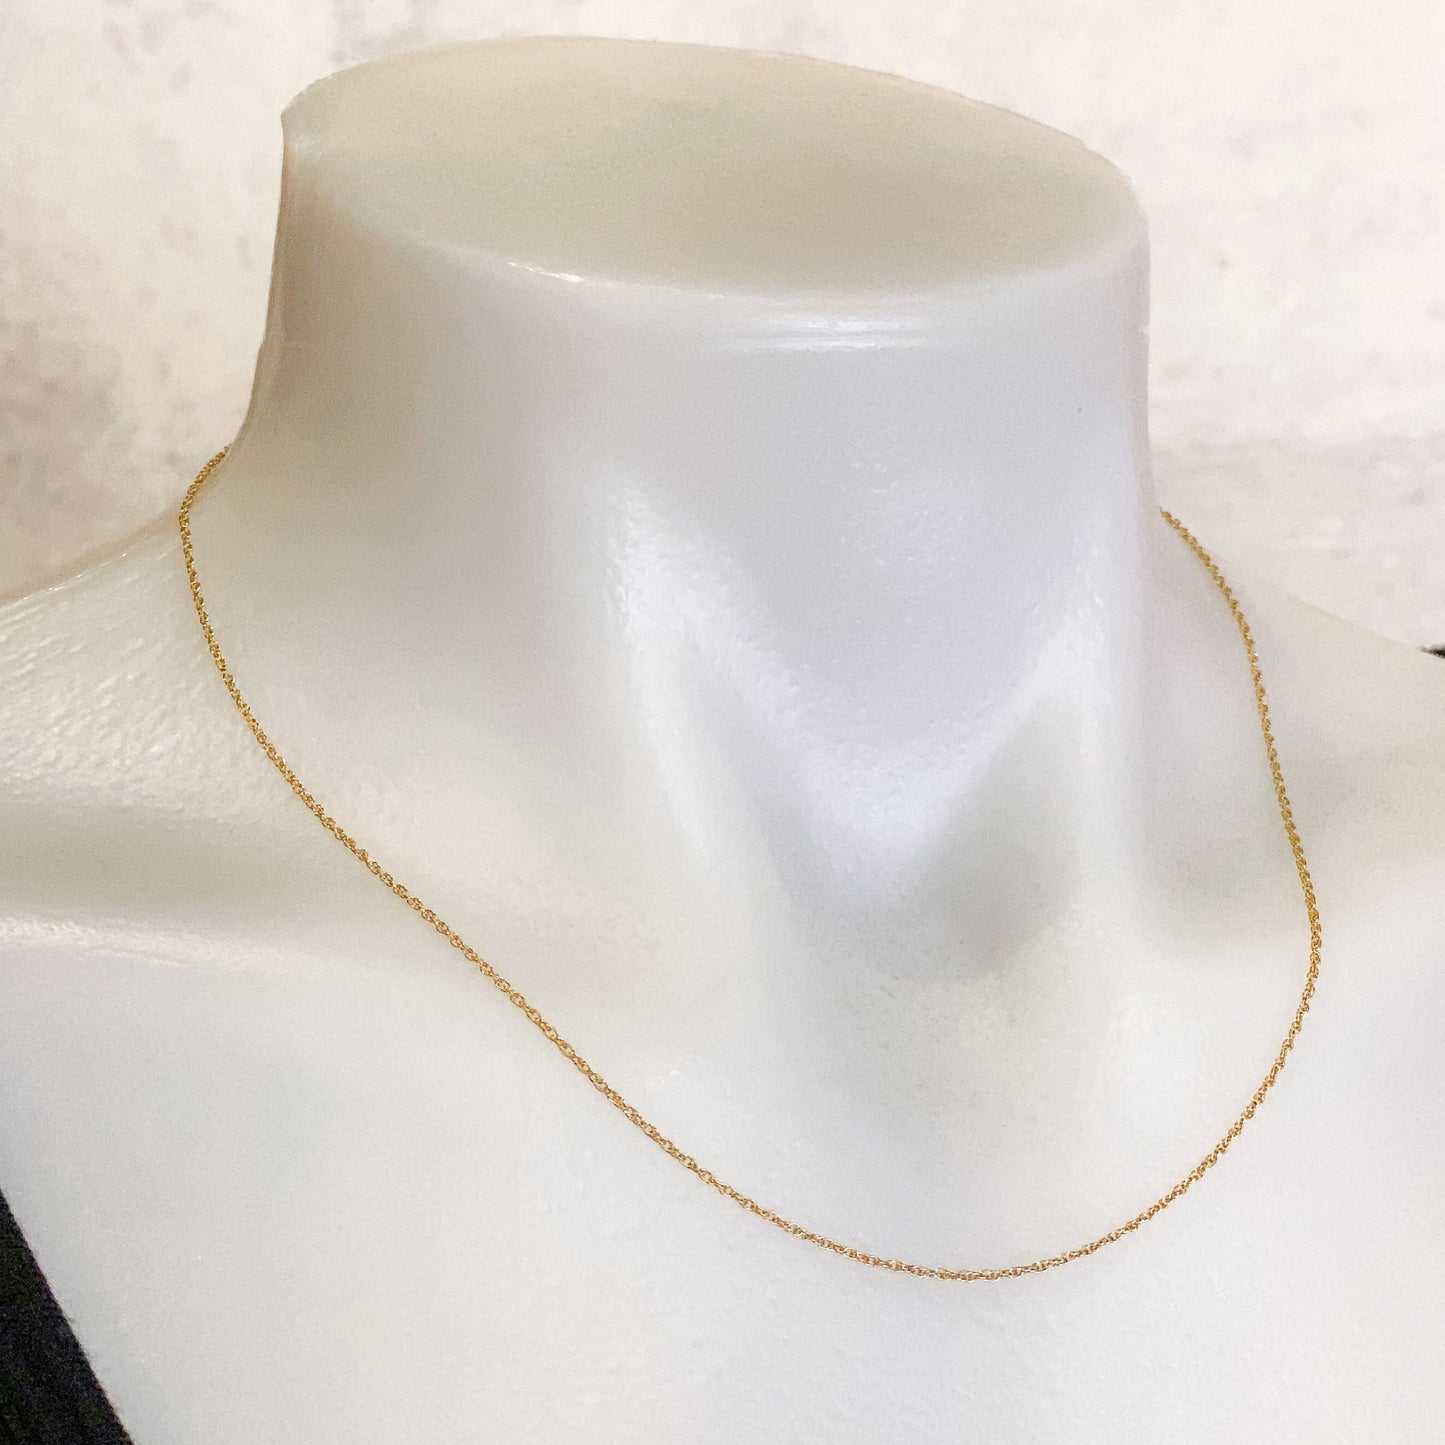 18" Fine Rope Necklace Chain (Gold Filled)